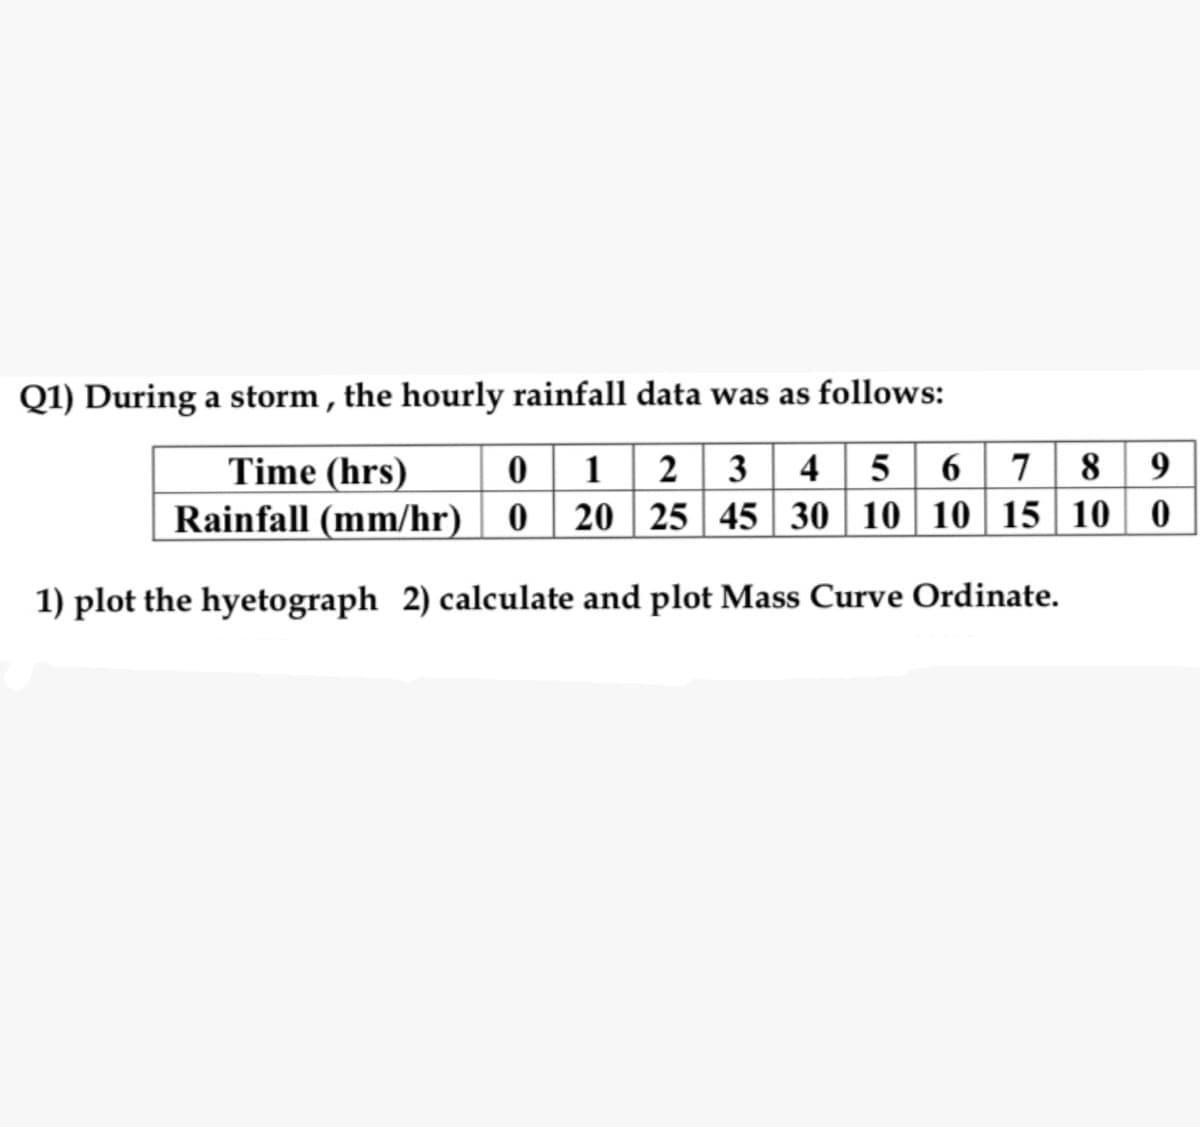 Q1) During a storm , the hourly rainfall data was as follows:
0 1 2 3 4 5 6 7 8 9
Time (hrs)
Rainfall (mm/hr) | 0 | 20 | 25 45 30 10 10 | 15 10 0
1) plot the hyetograph 2) calculate and plot Mass Curve Ordinate.
